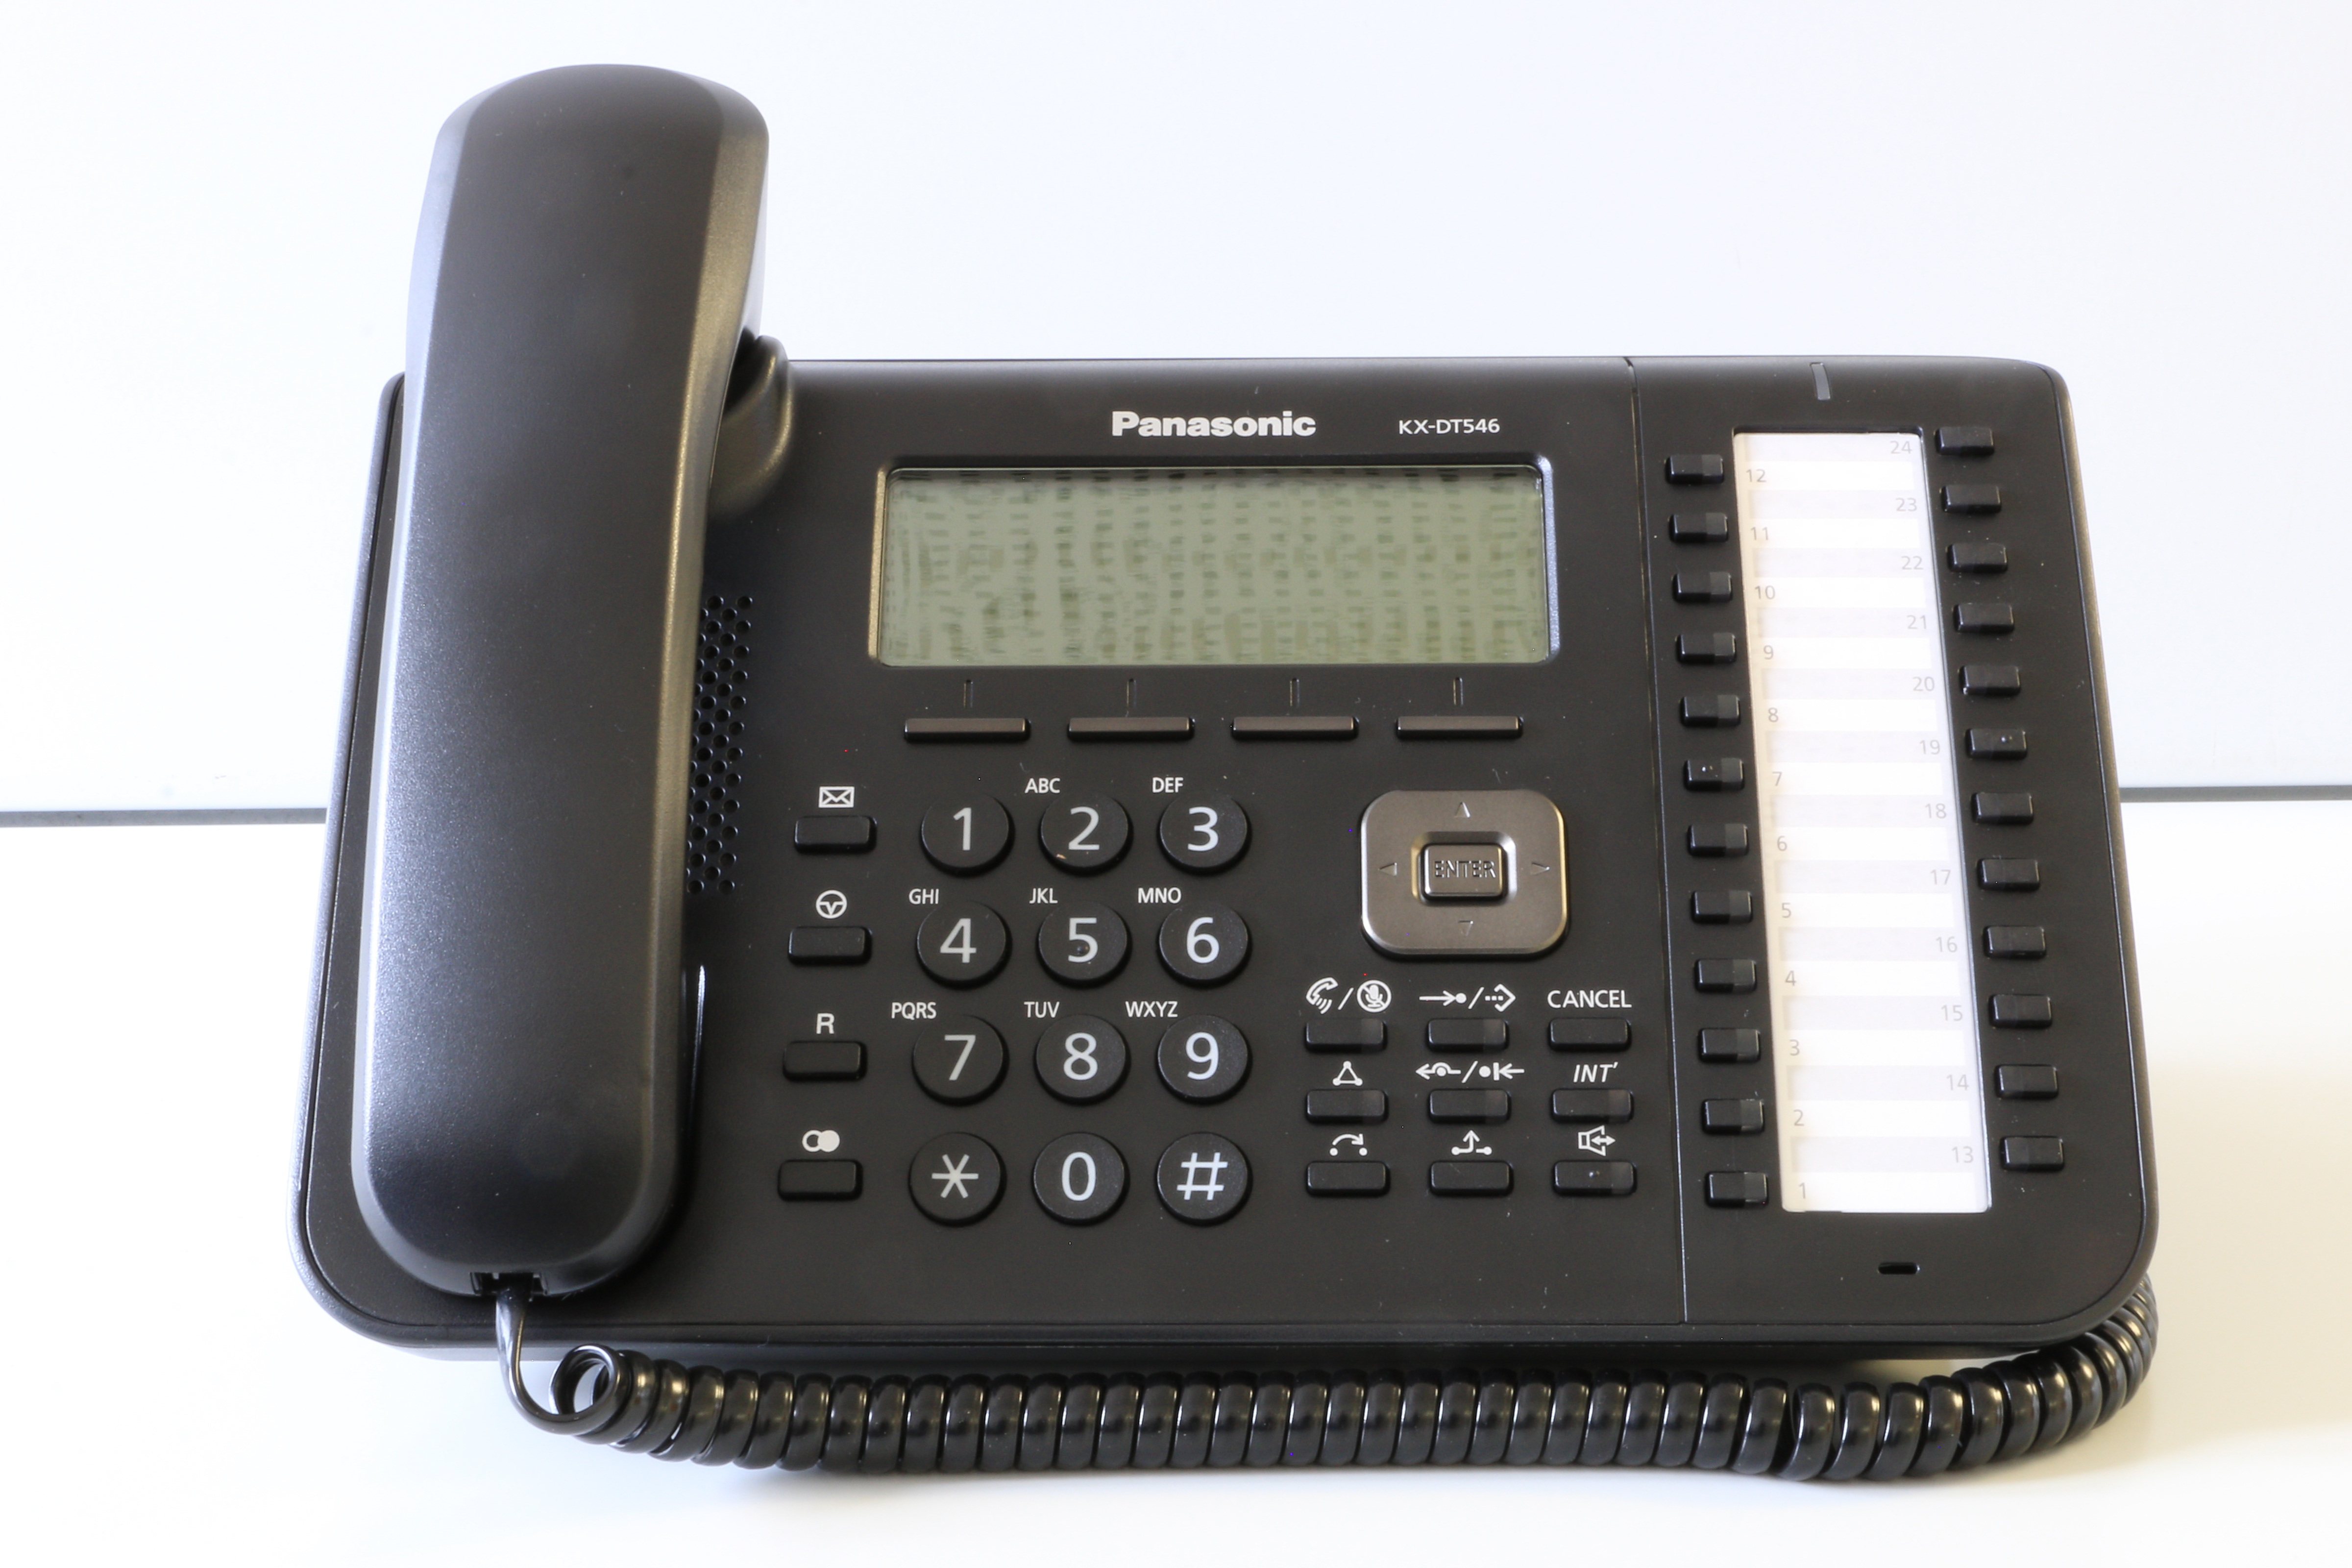 An advisory on Right Computer Systems’ landline numbers